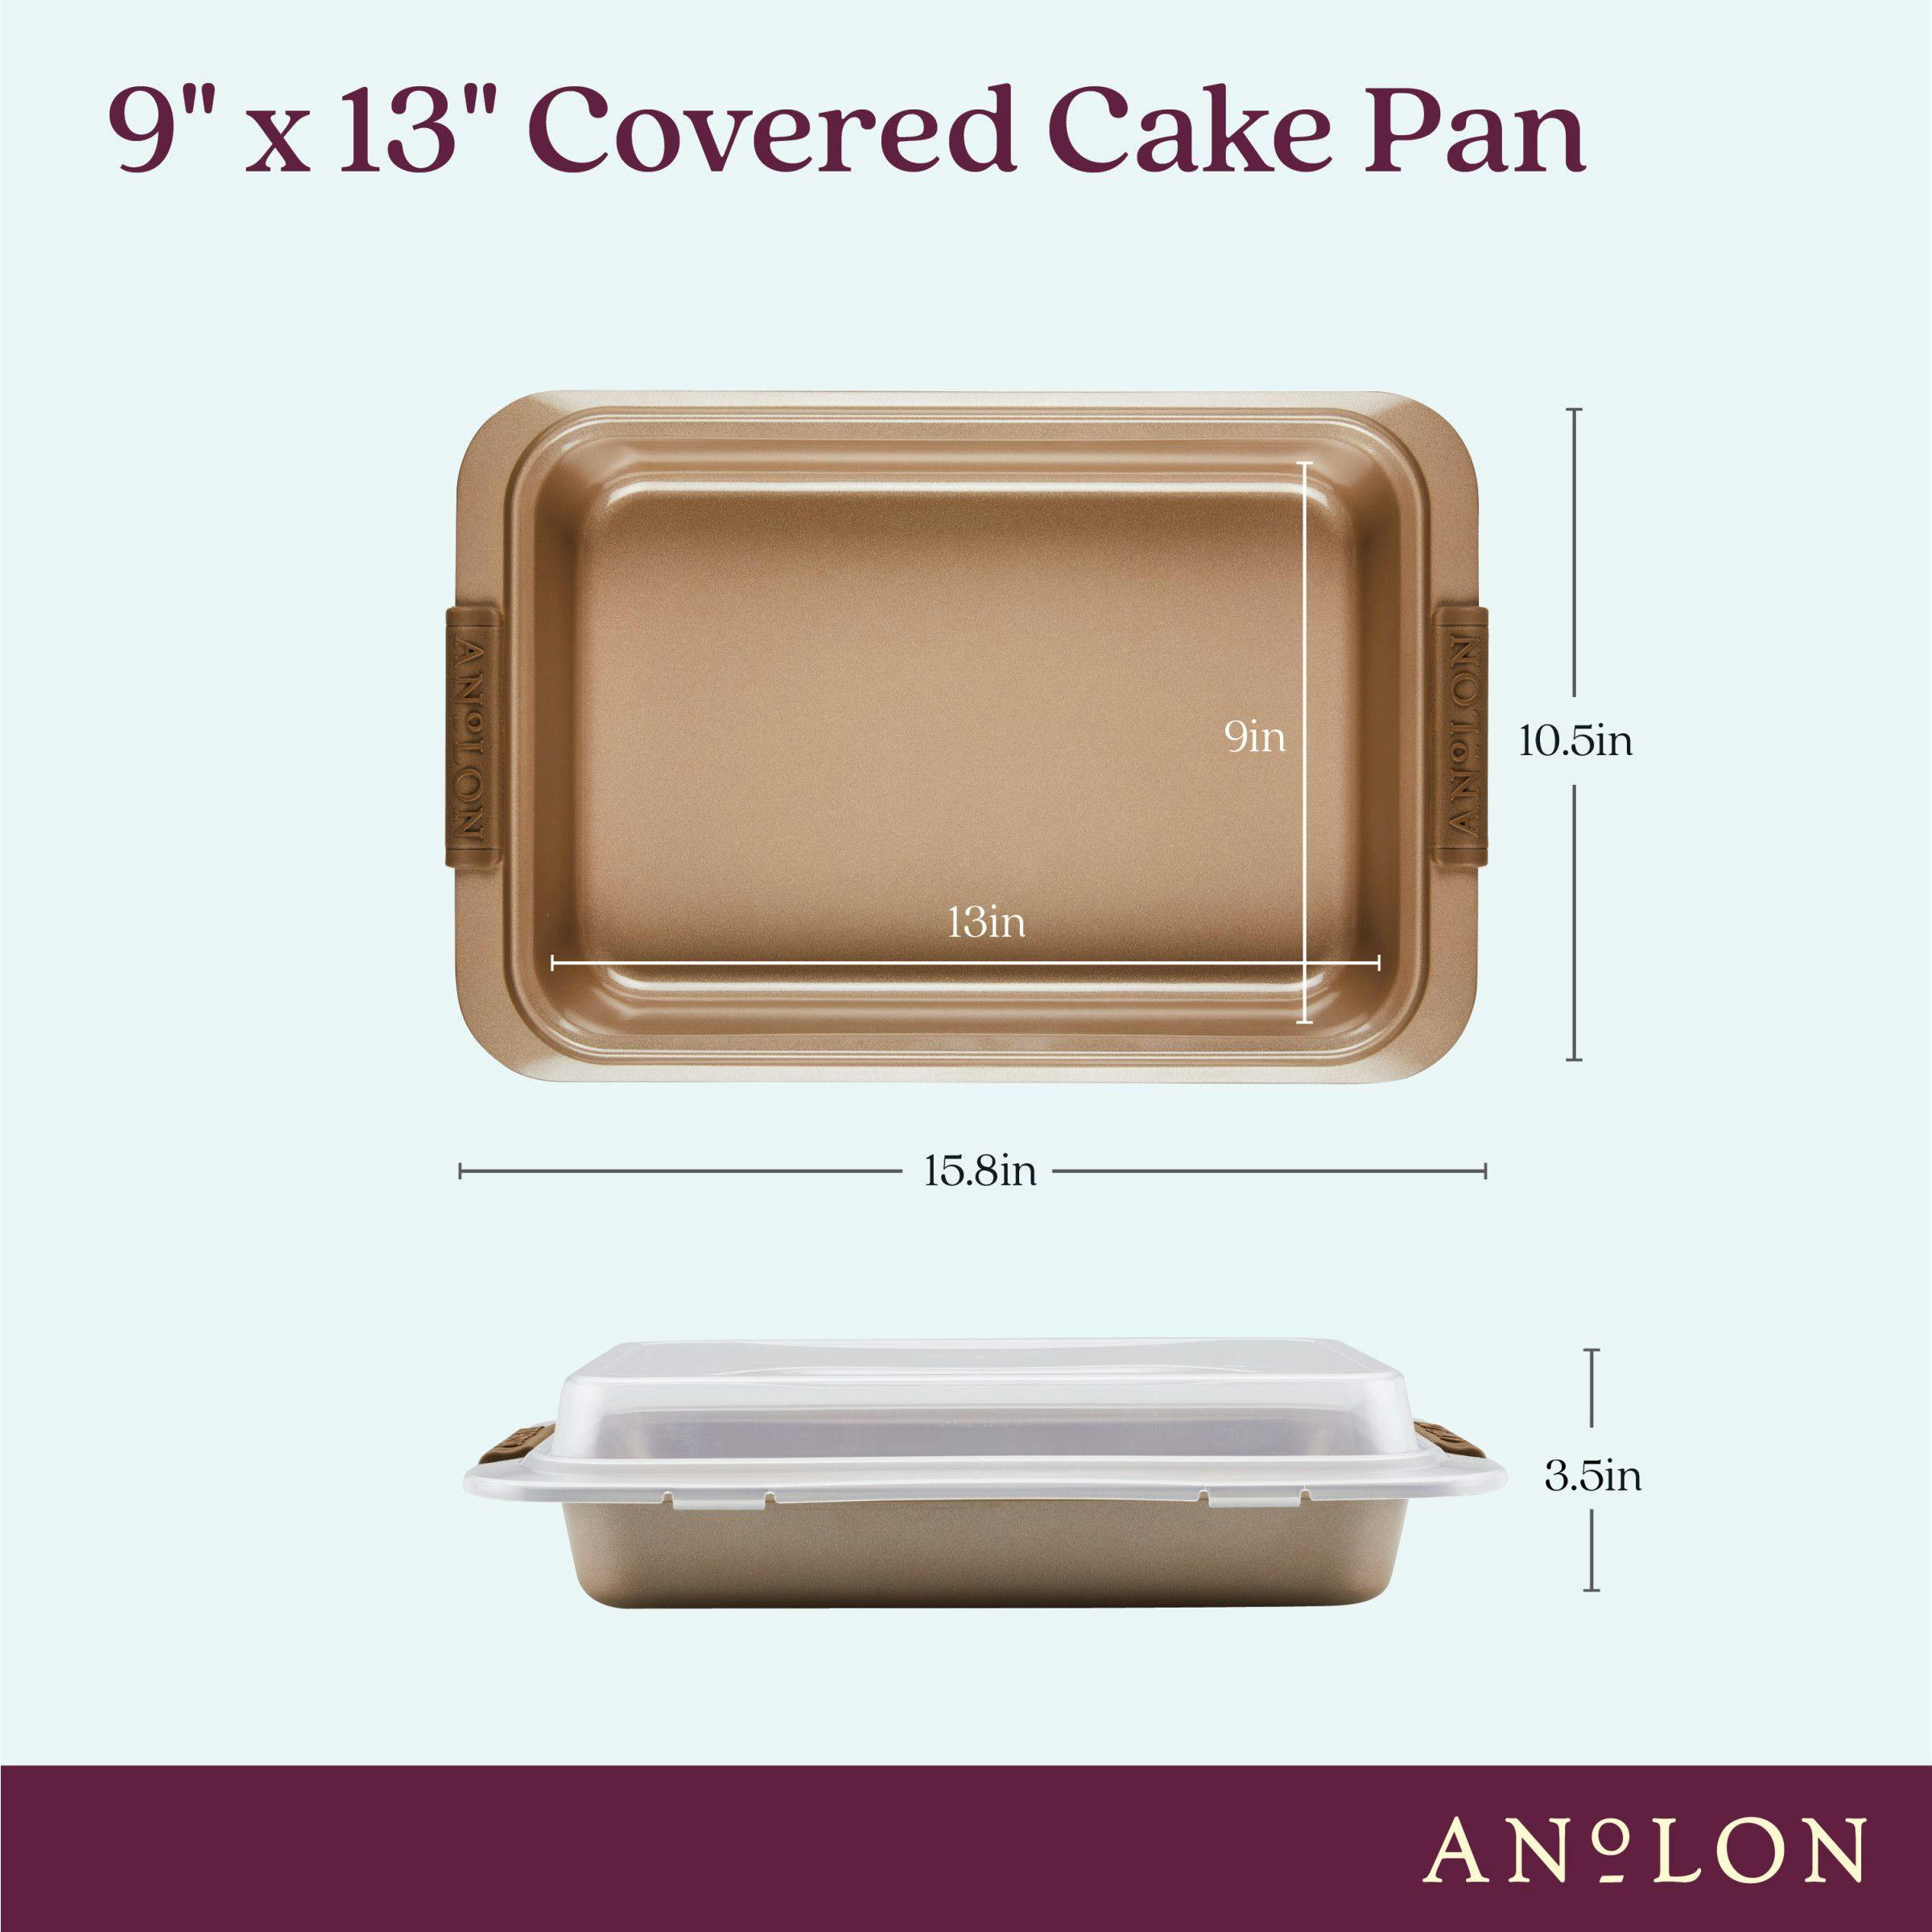 Anolon Advanced Bakeware Nonstick Cake Pan with Lid and Silicone Grips, 9-inch x 13-inch, Bronze